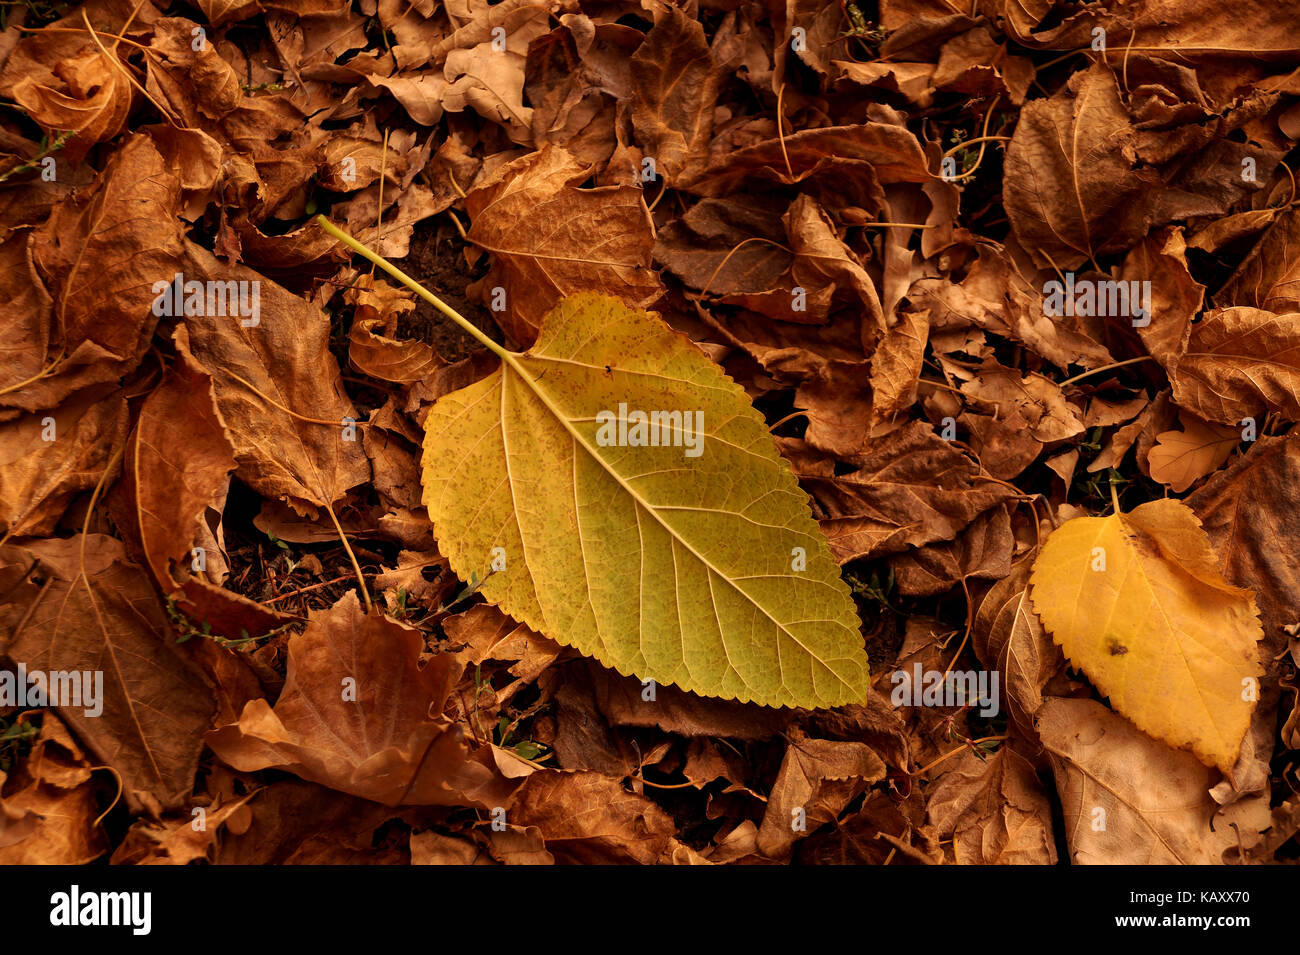 Autumn etude from the fallen-down yellow and brown leaves Stock Photo